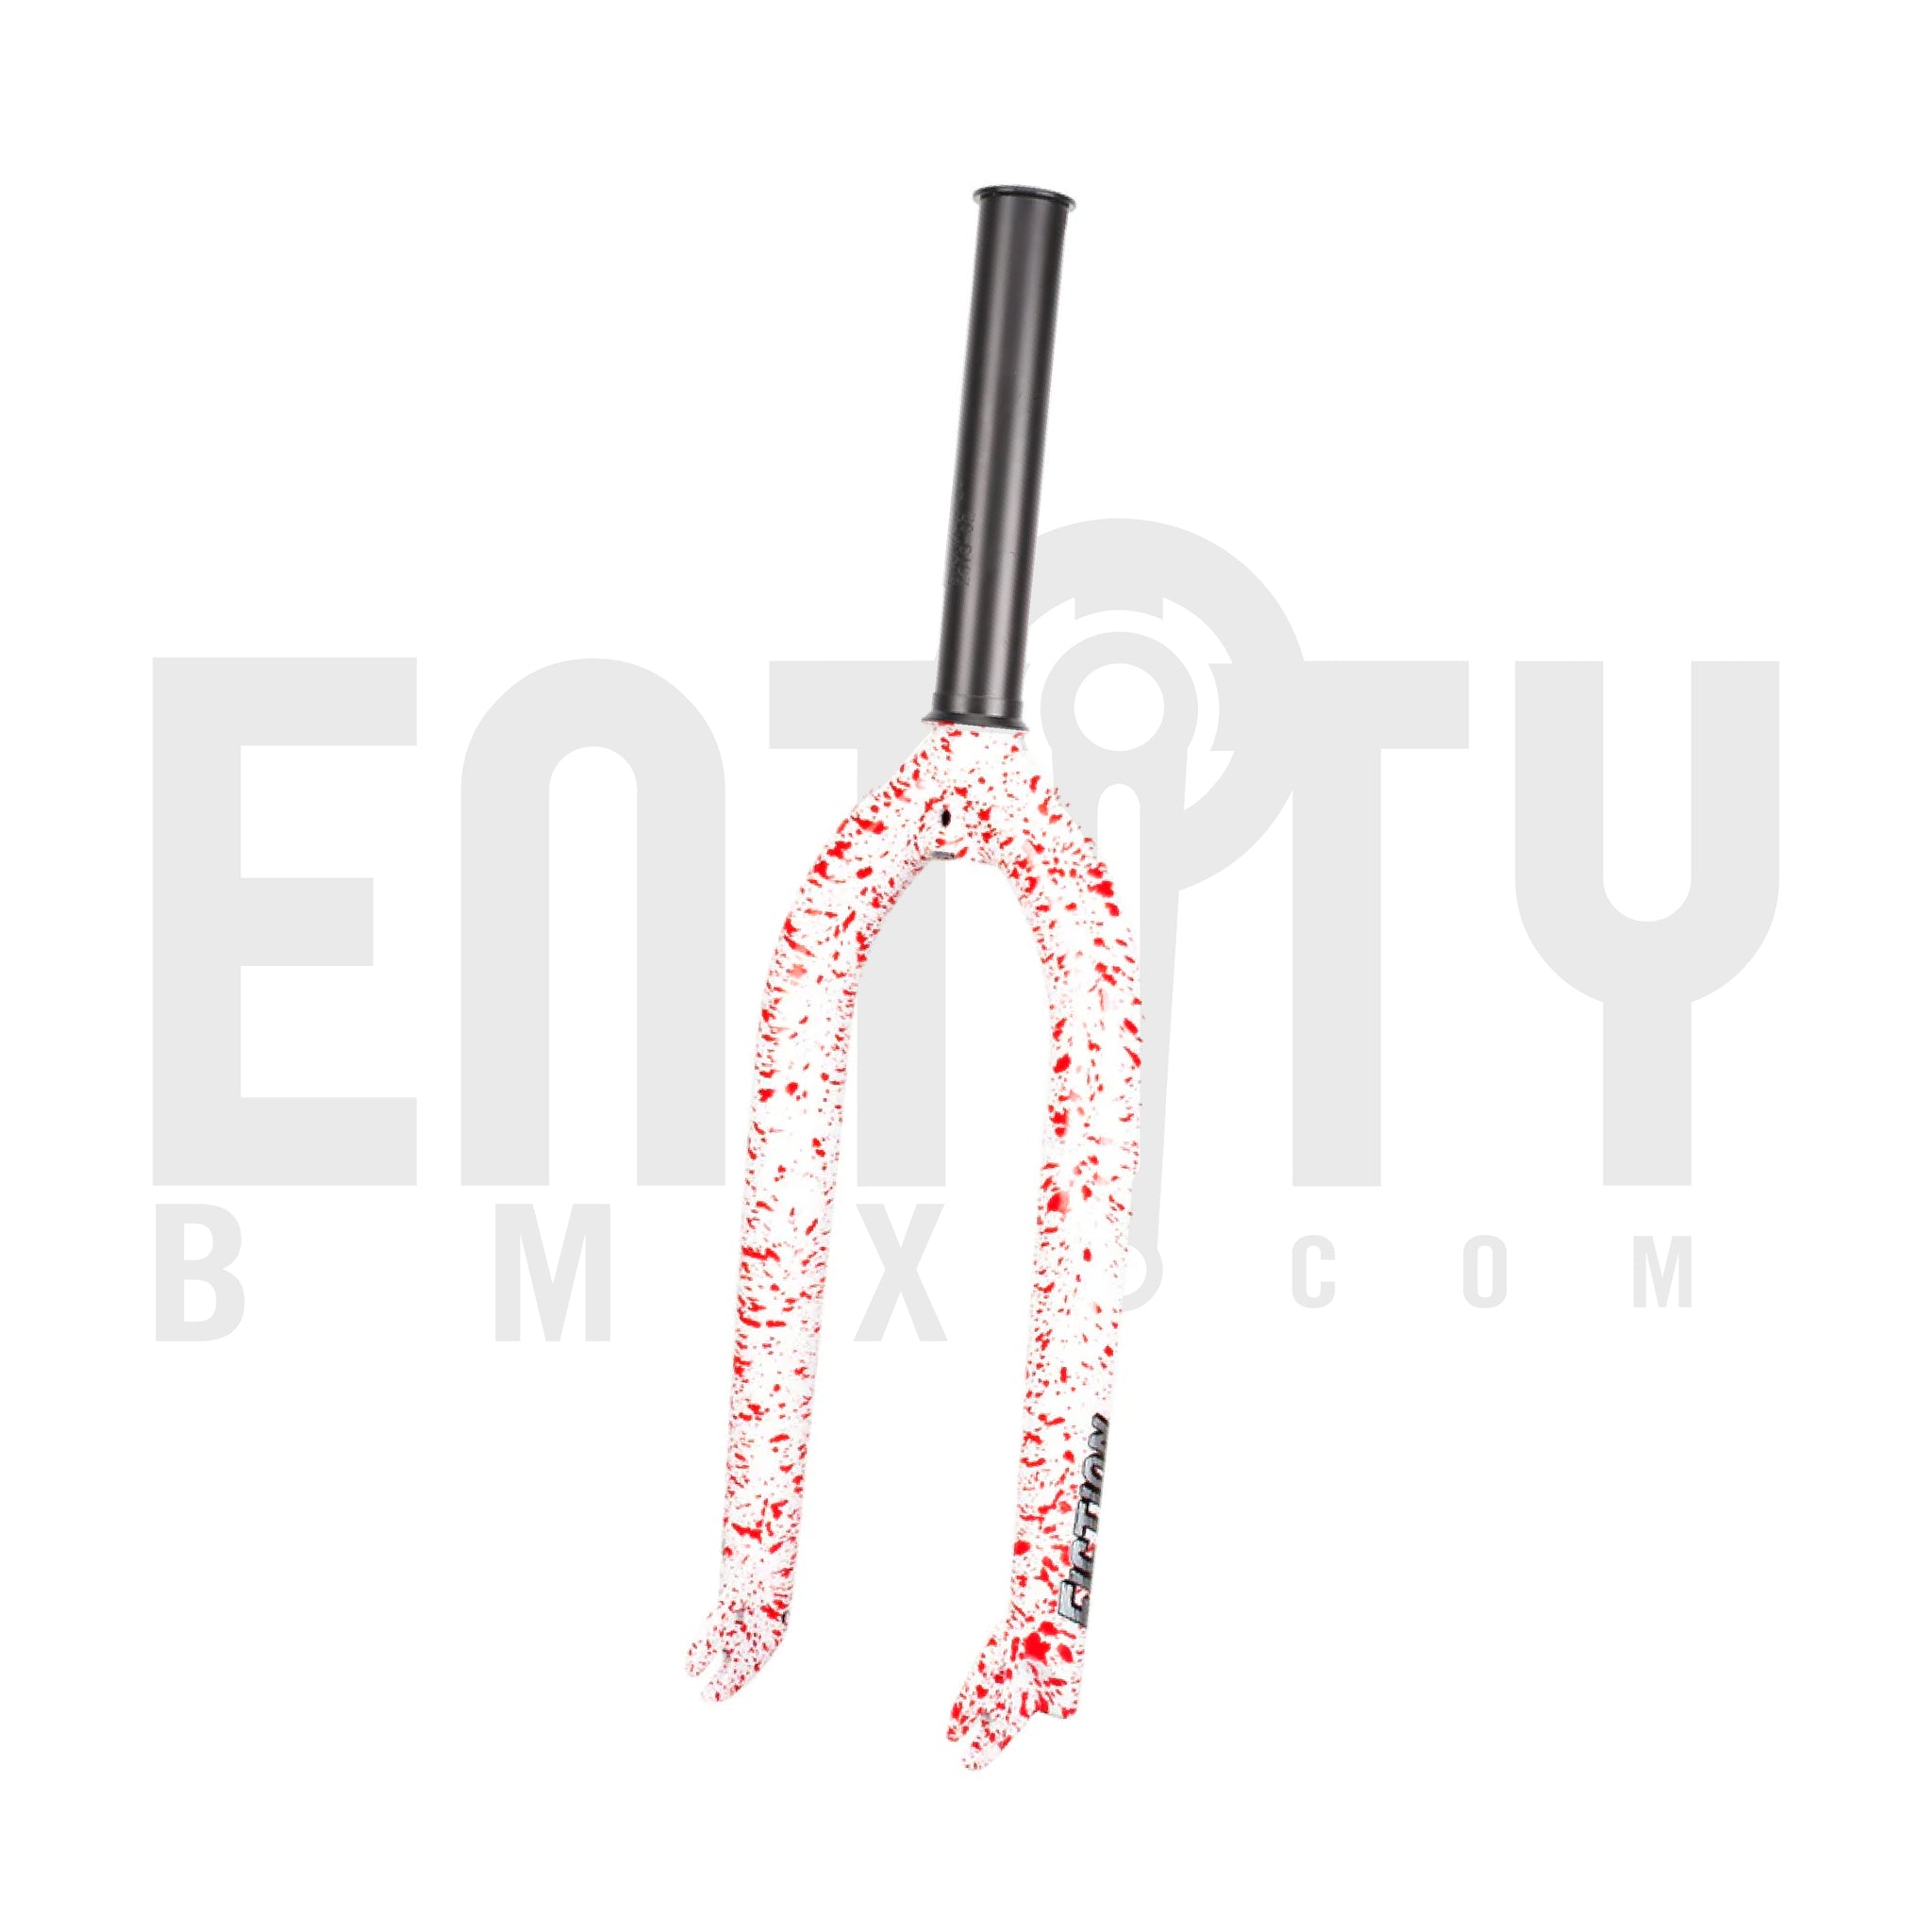 Fiction Bikes Shank Forks PSYCHO edition, White with blood spatter